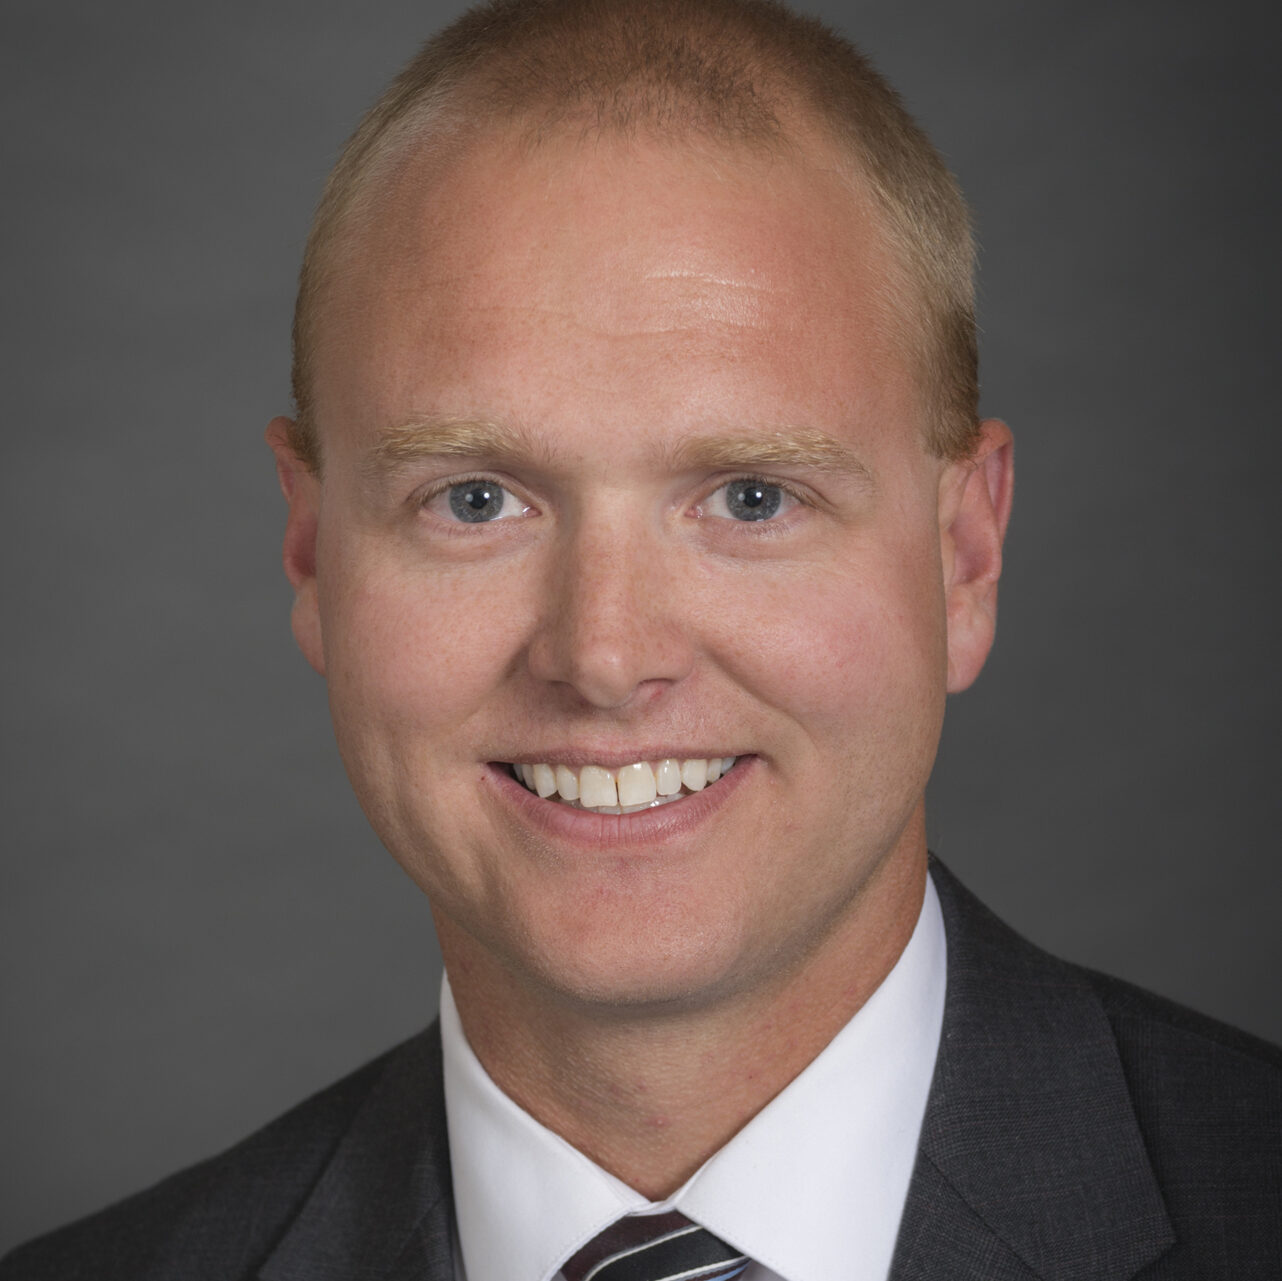 A portrait of Gregory Lehmann of the Department of Health Management and Policy in the College of Public Health at the University of Iowa.